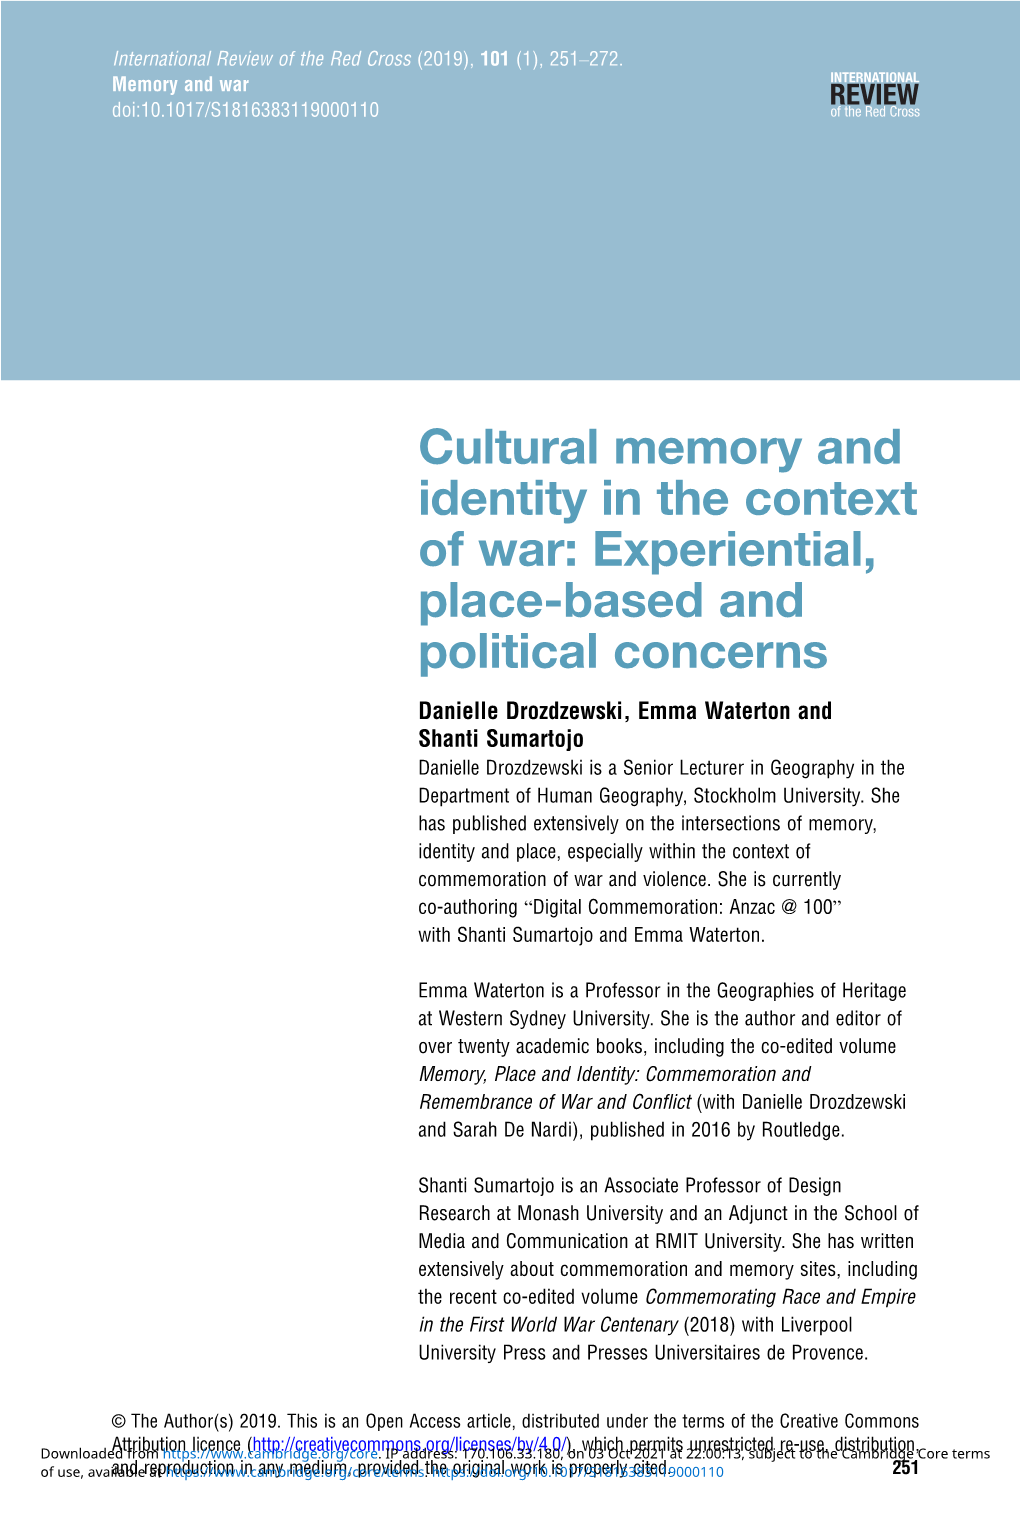 Cultural Memory and Identity in the Context Of